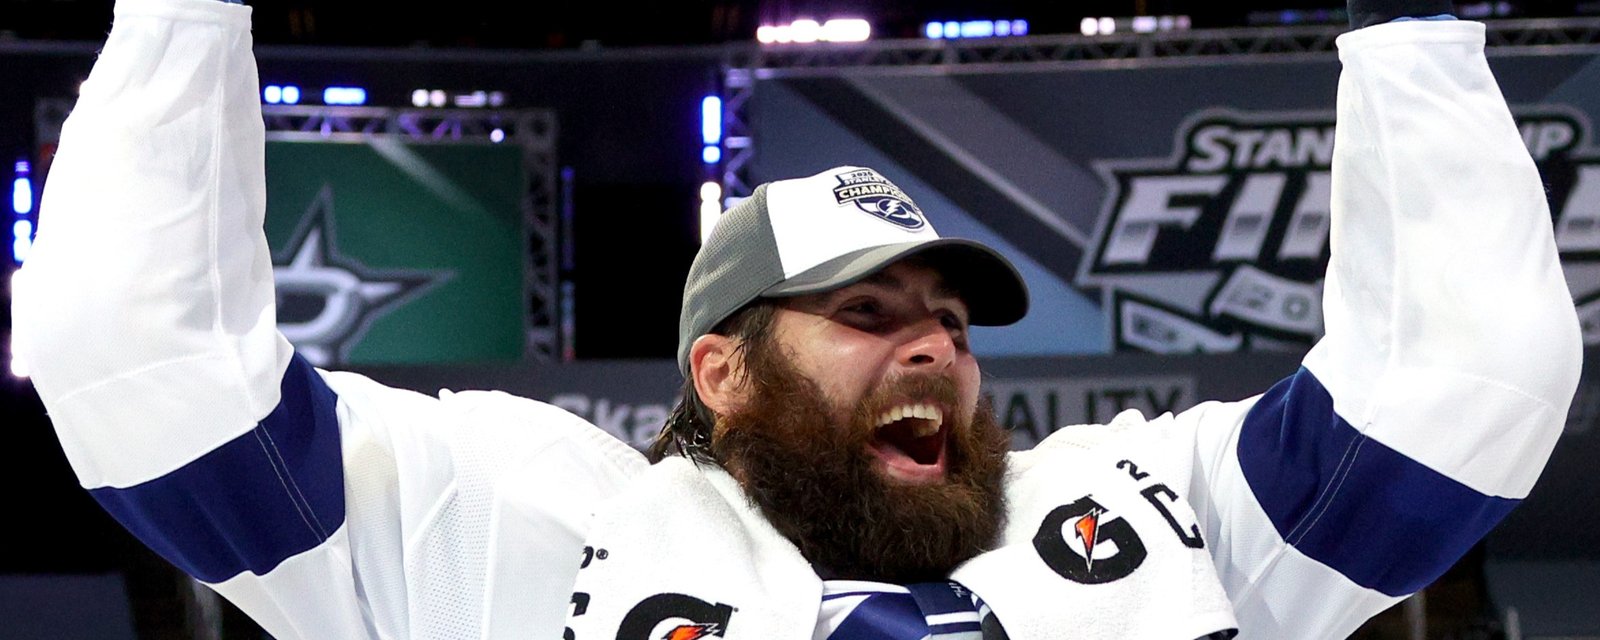 Pat Maroon promises to win third consecutive Stanley Cup in hilarious post! 